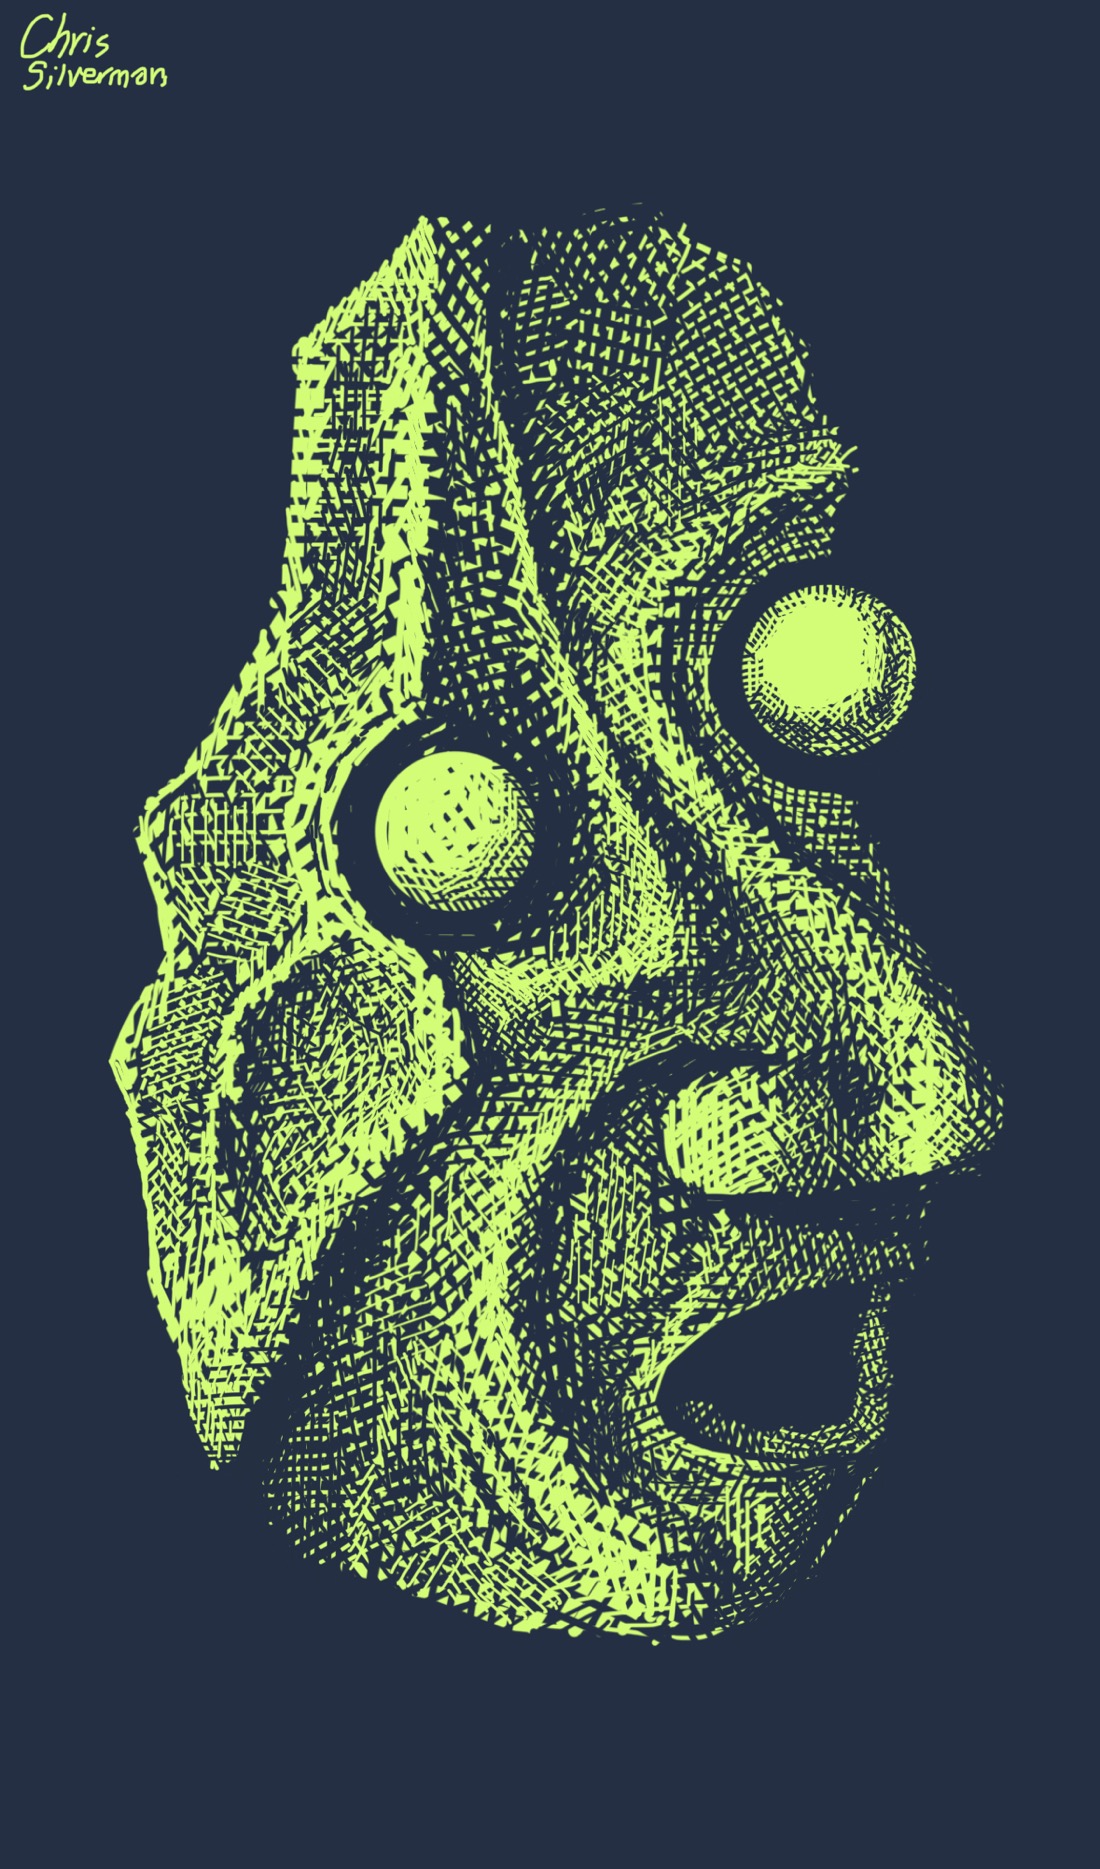 A rough, misshapen mask of a face—more suggestive of a fragment than a single object itself—with a large nose, open mouth, and bony, irregular striations. The eyes are two blank spheres that seem to float next to the mask. The mask is bright green on a black background.